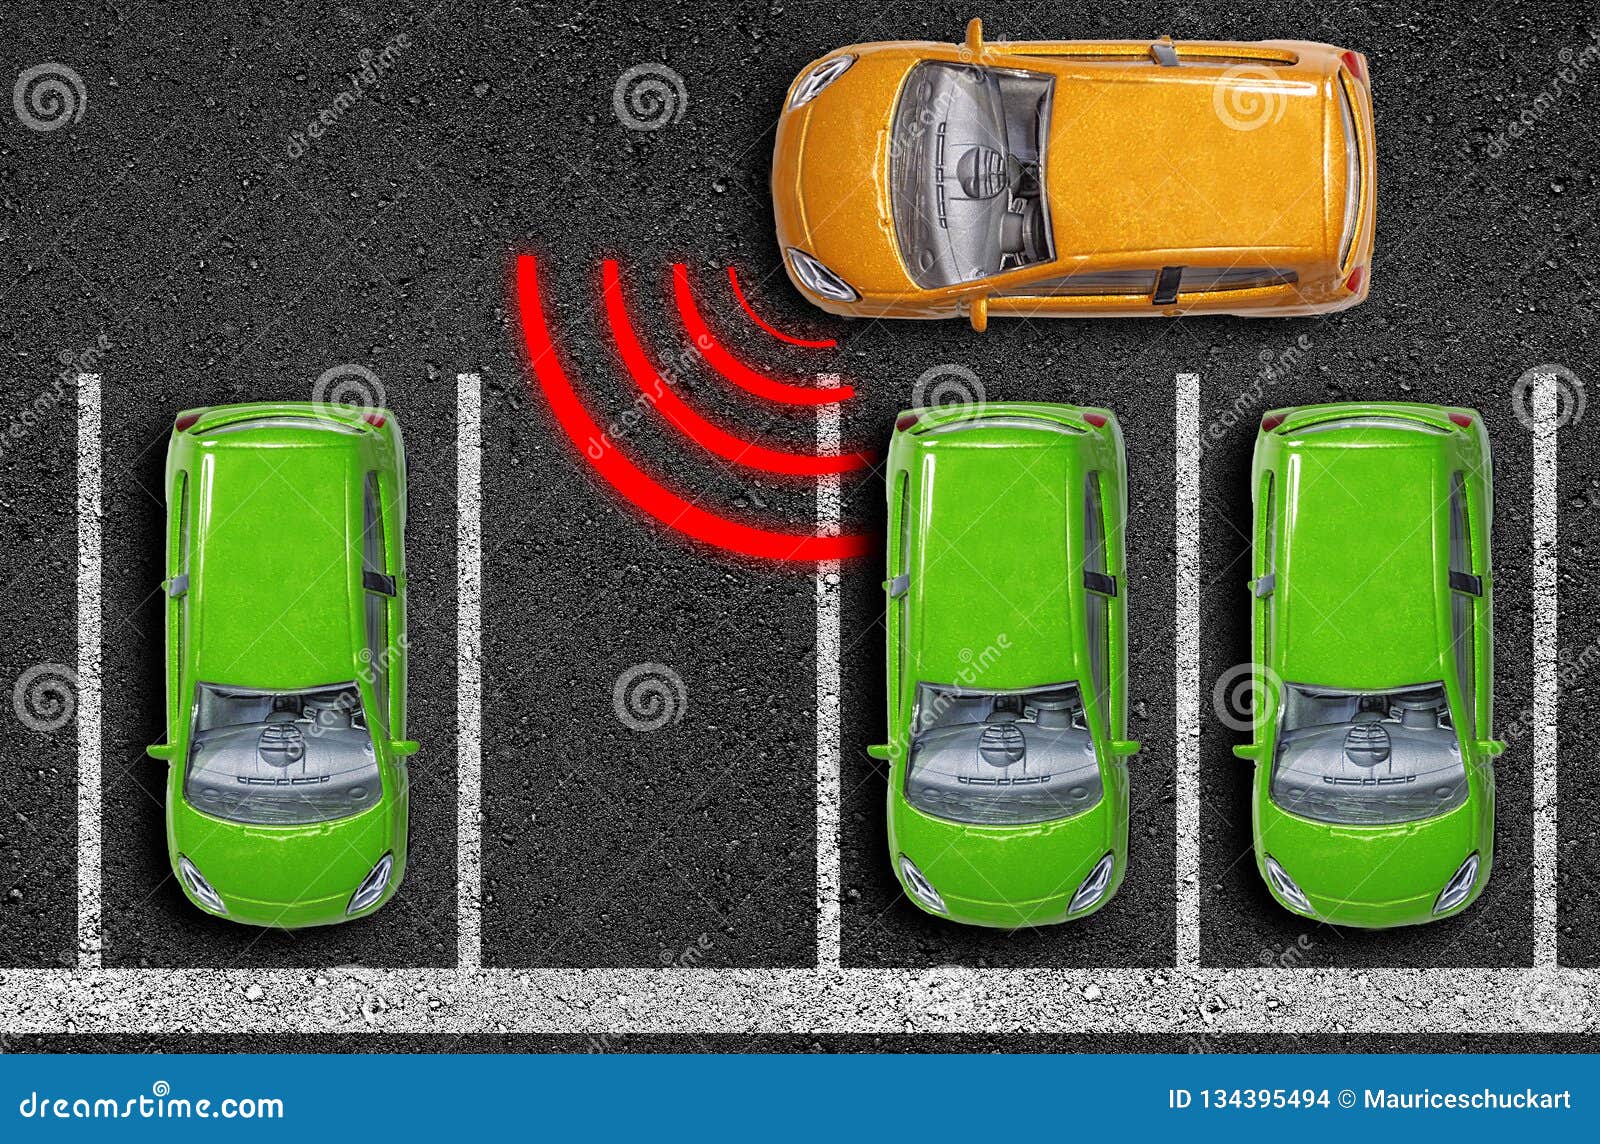 asphalt with cars on a road with distance sensor and emergence break assistant